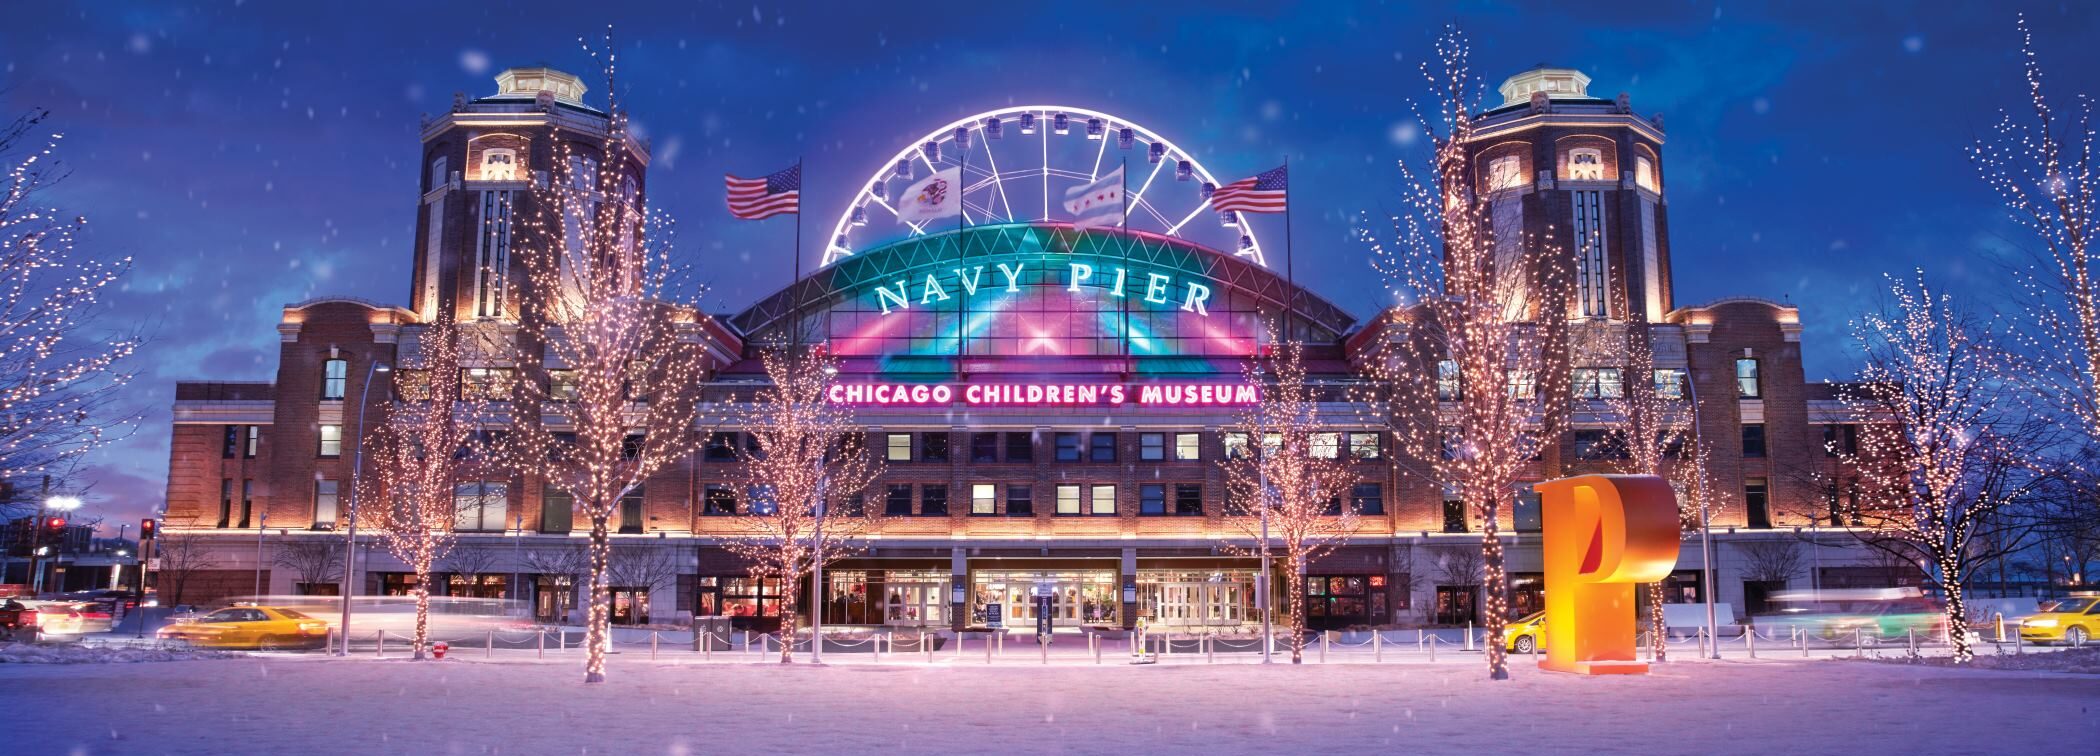 There’s No Place Like Navy Pier for the Holidays